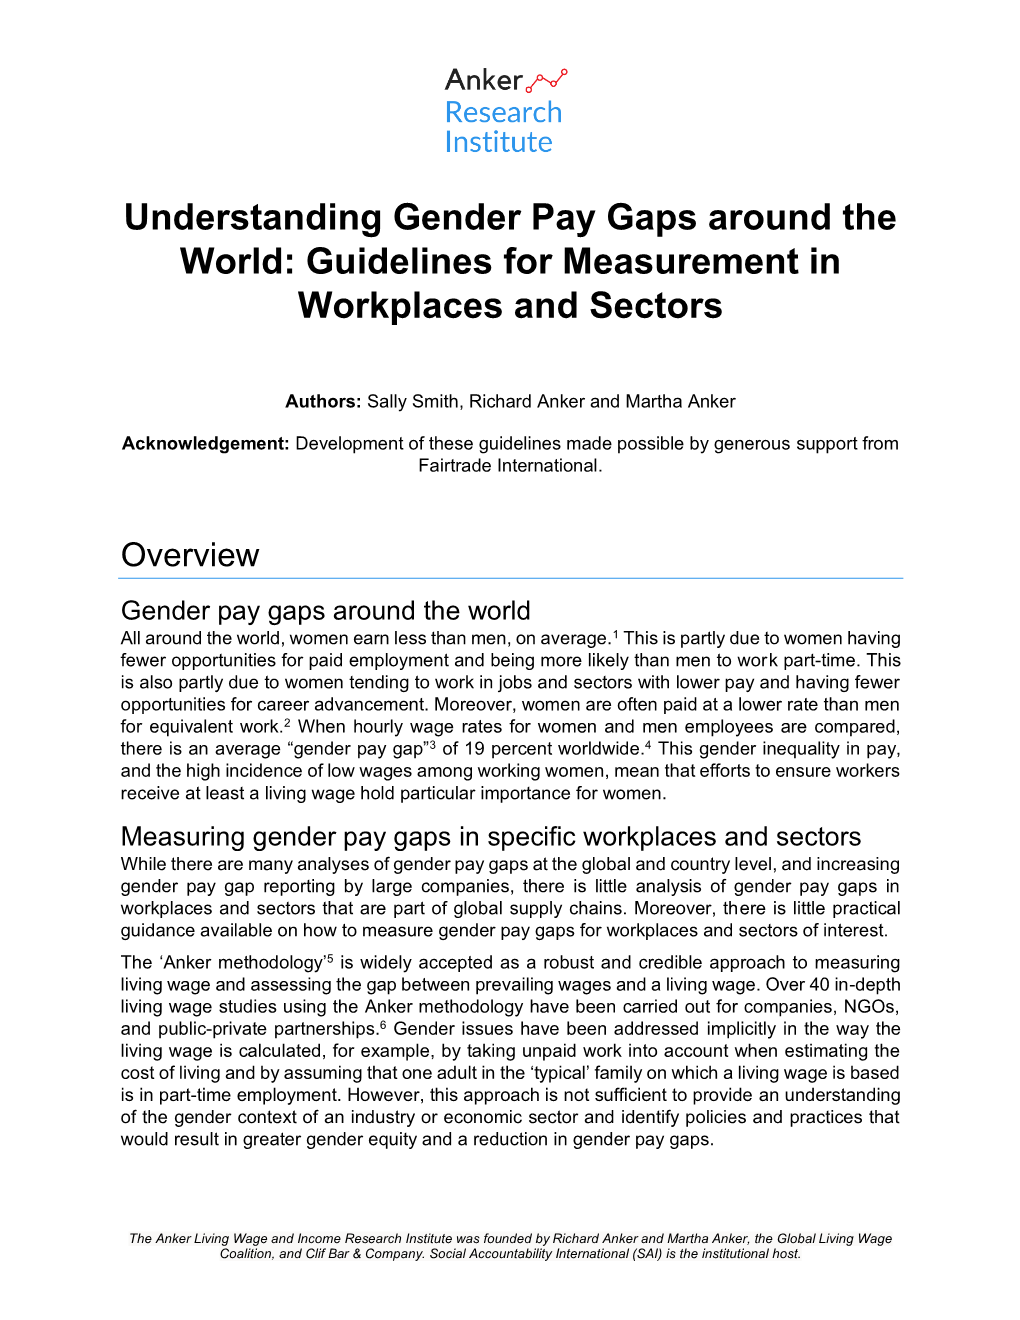 Understanding Gender Pay Gaps Around the World: Guidelines for Measurement in Workplaces and Sectors